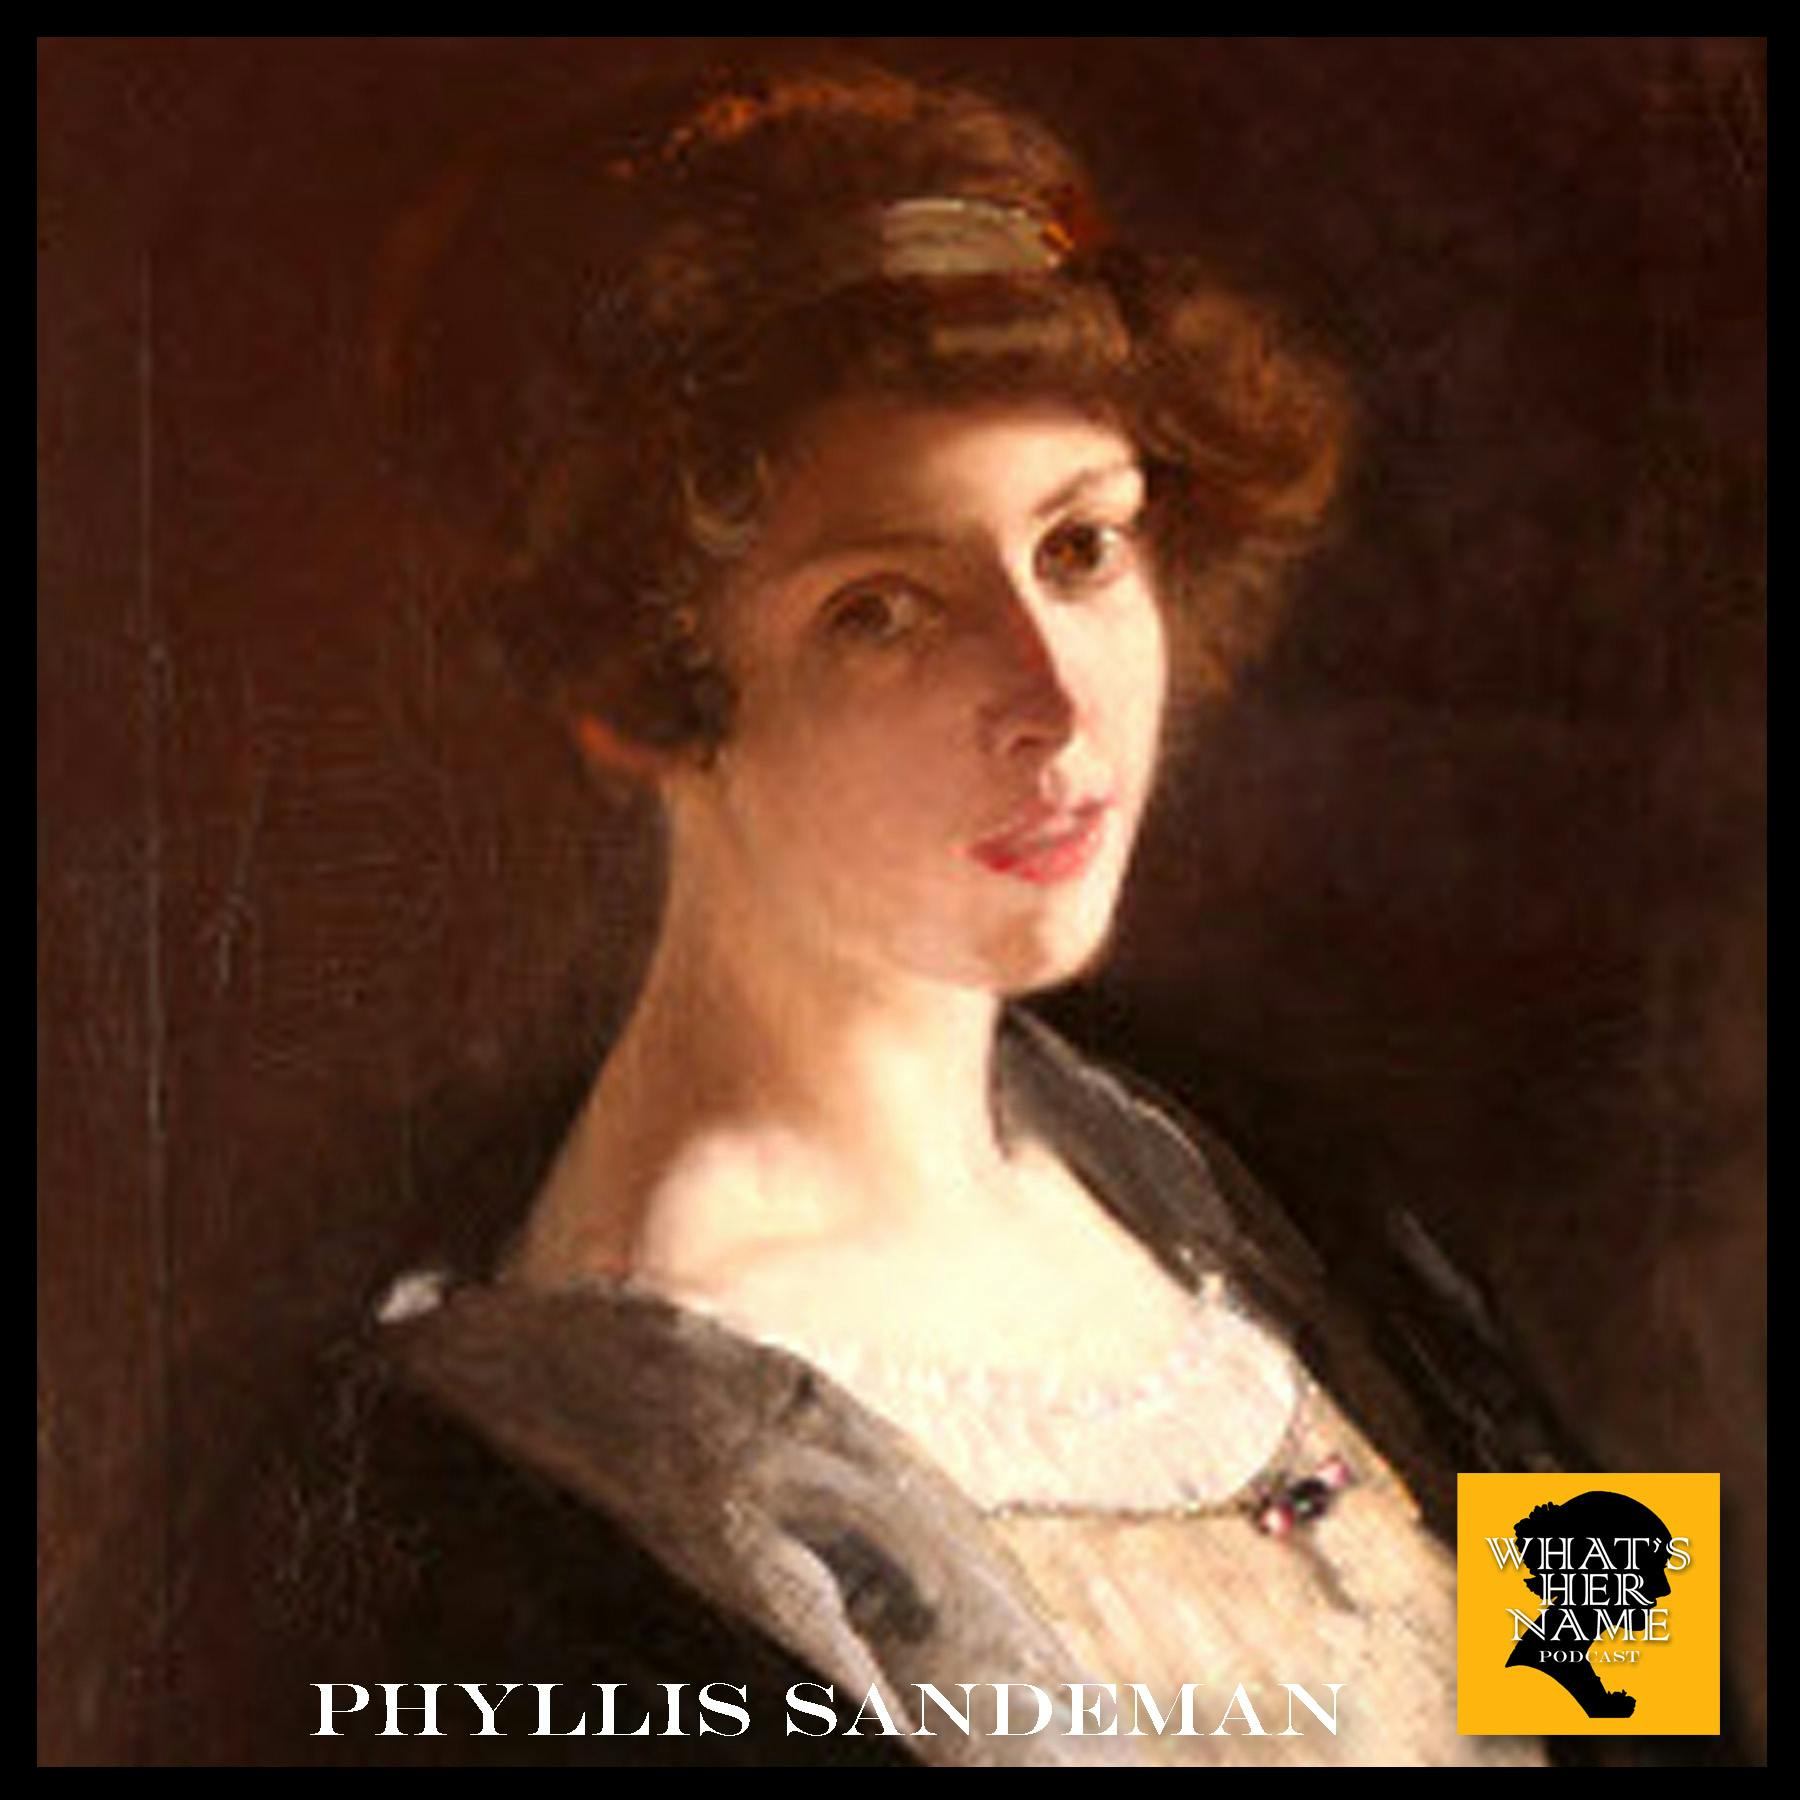 A COUNTRY HOUSE CHRISTMAS Phyllis Sandeman - 2022 Christmas Special